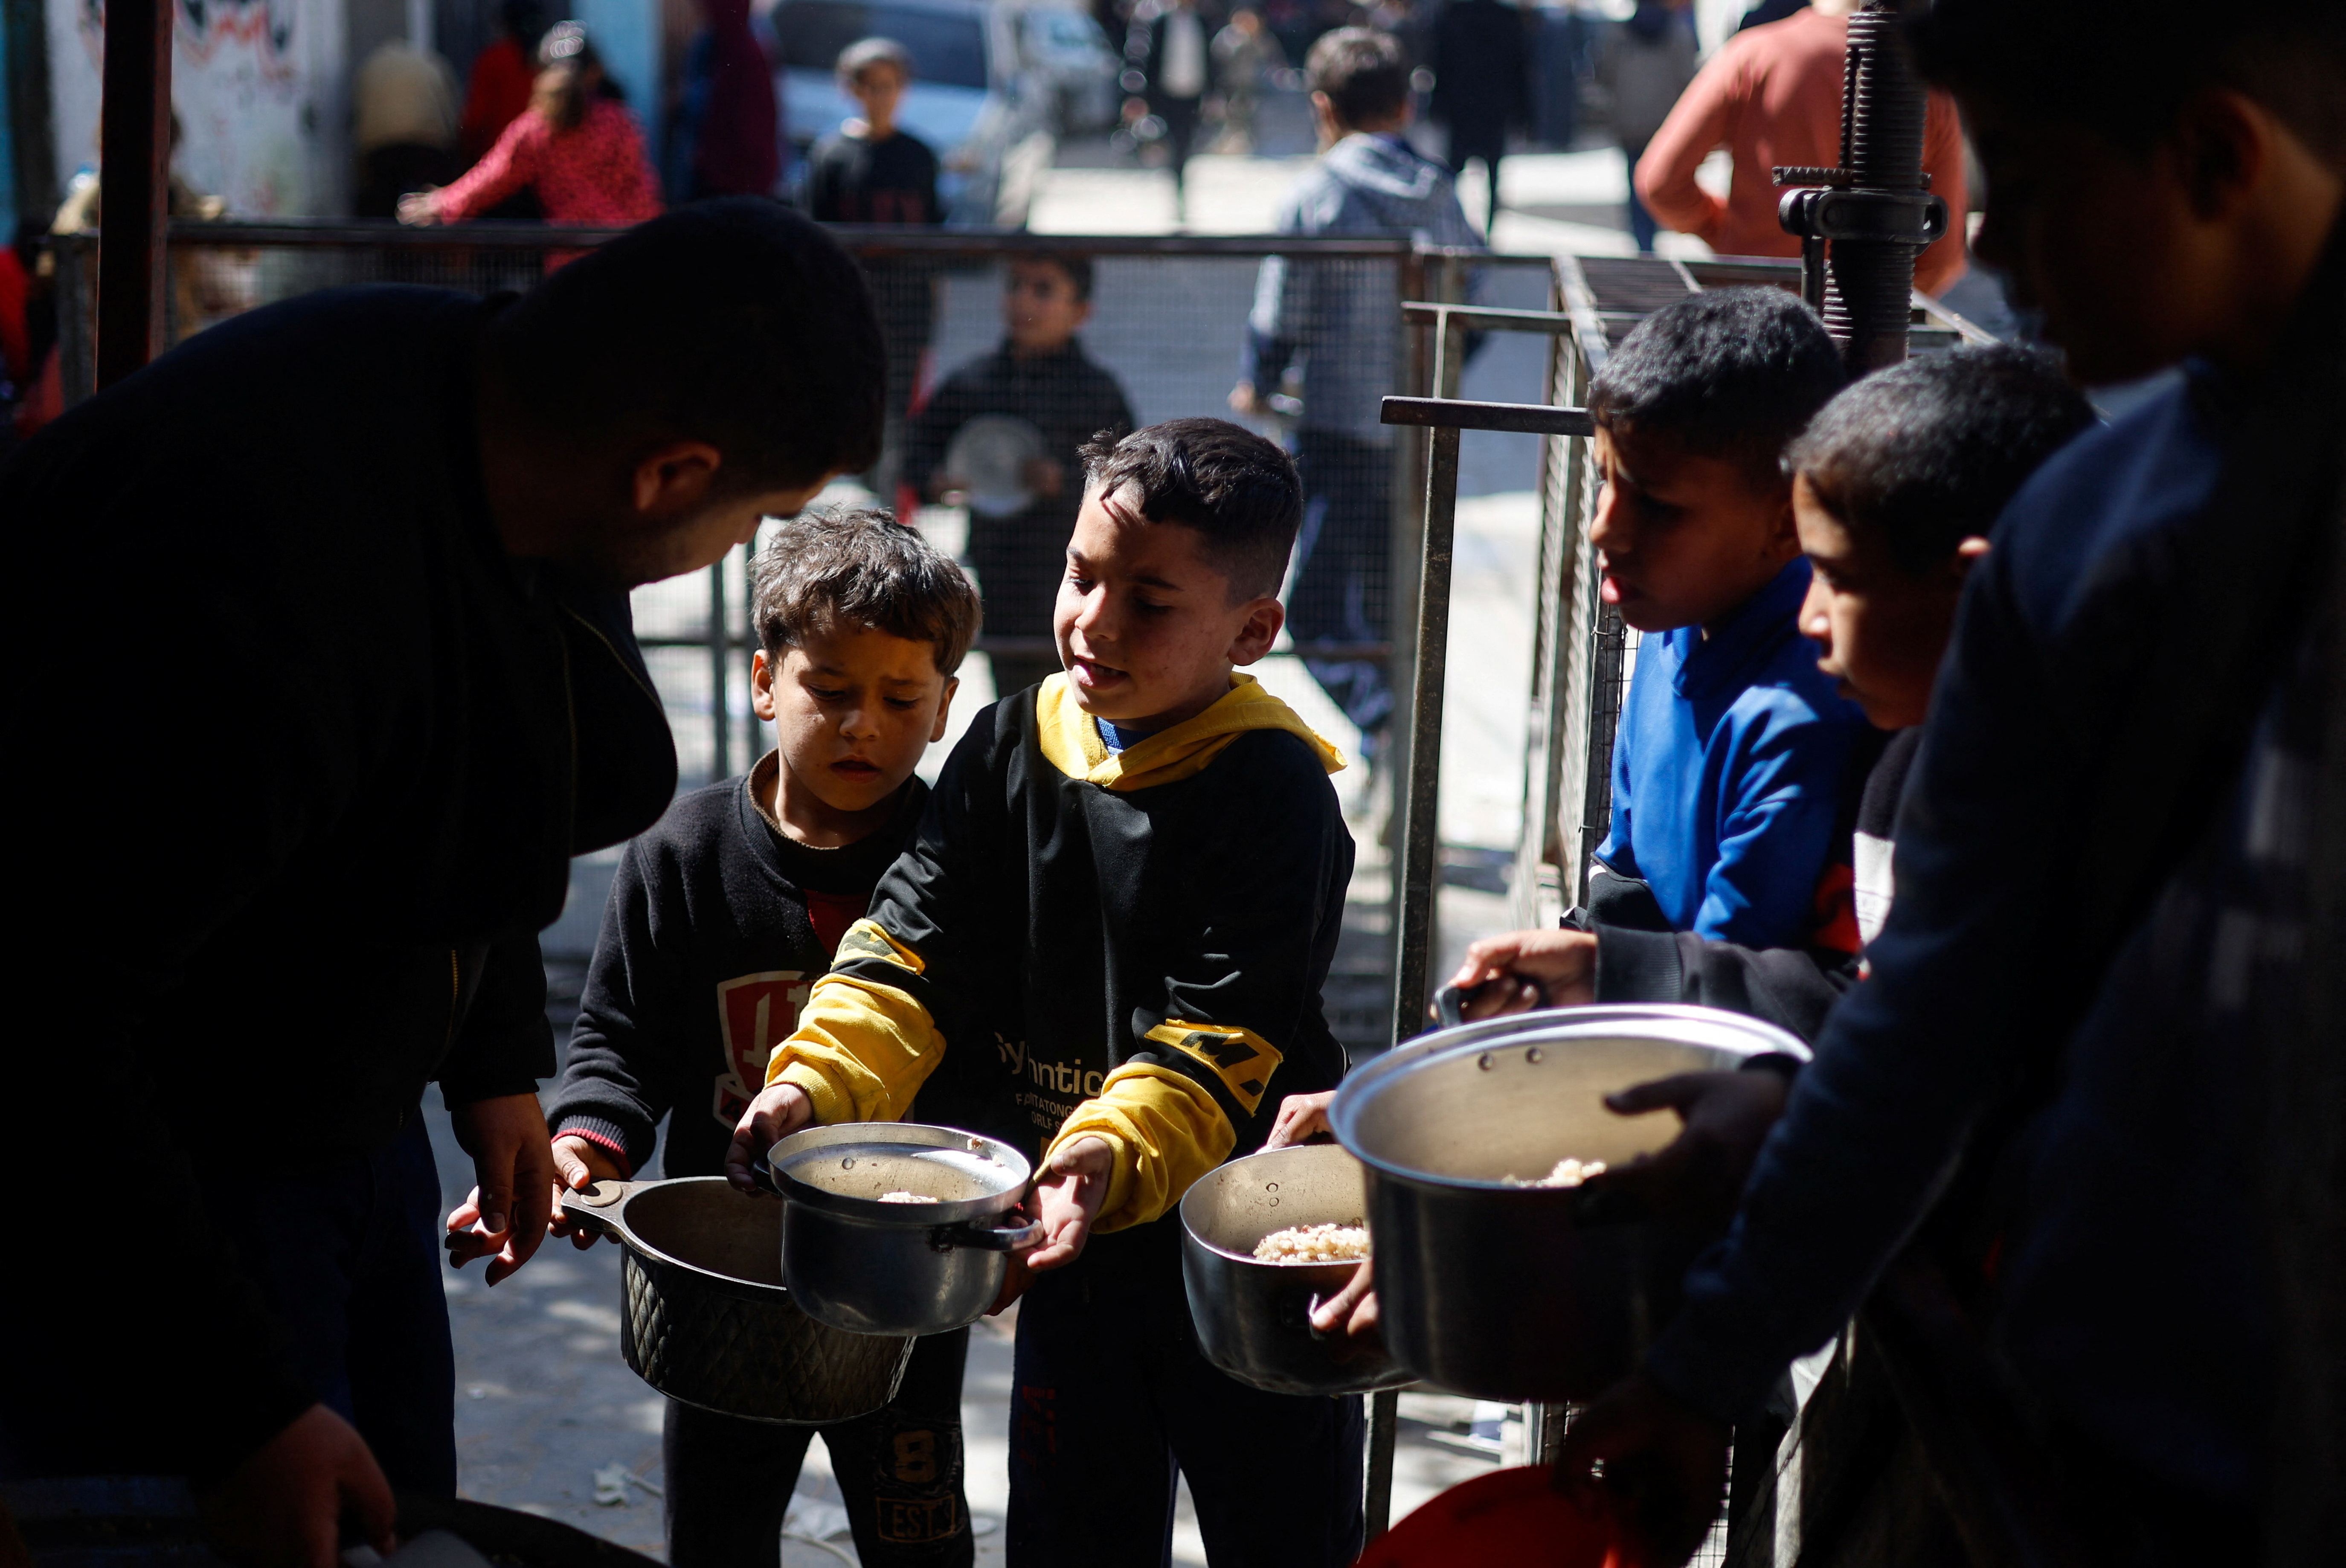 Children wait to receive food cooked by a charity kitchen amid shortages of food supplies in Rafah, Gaza, on March 5.